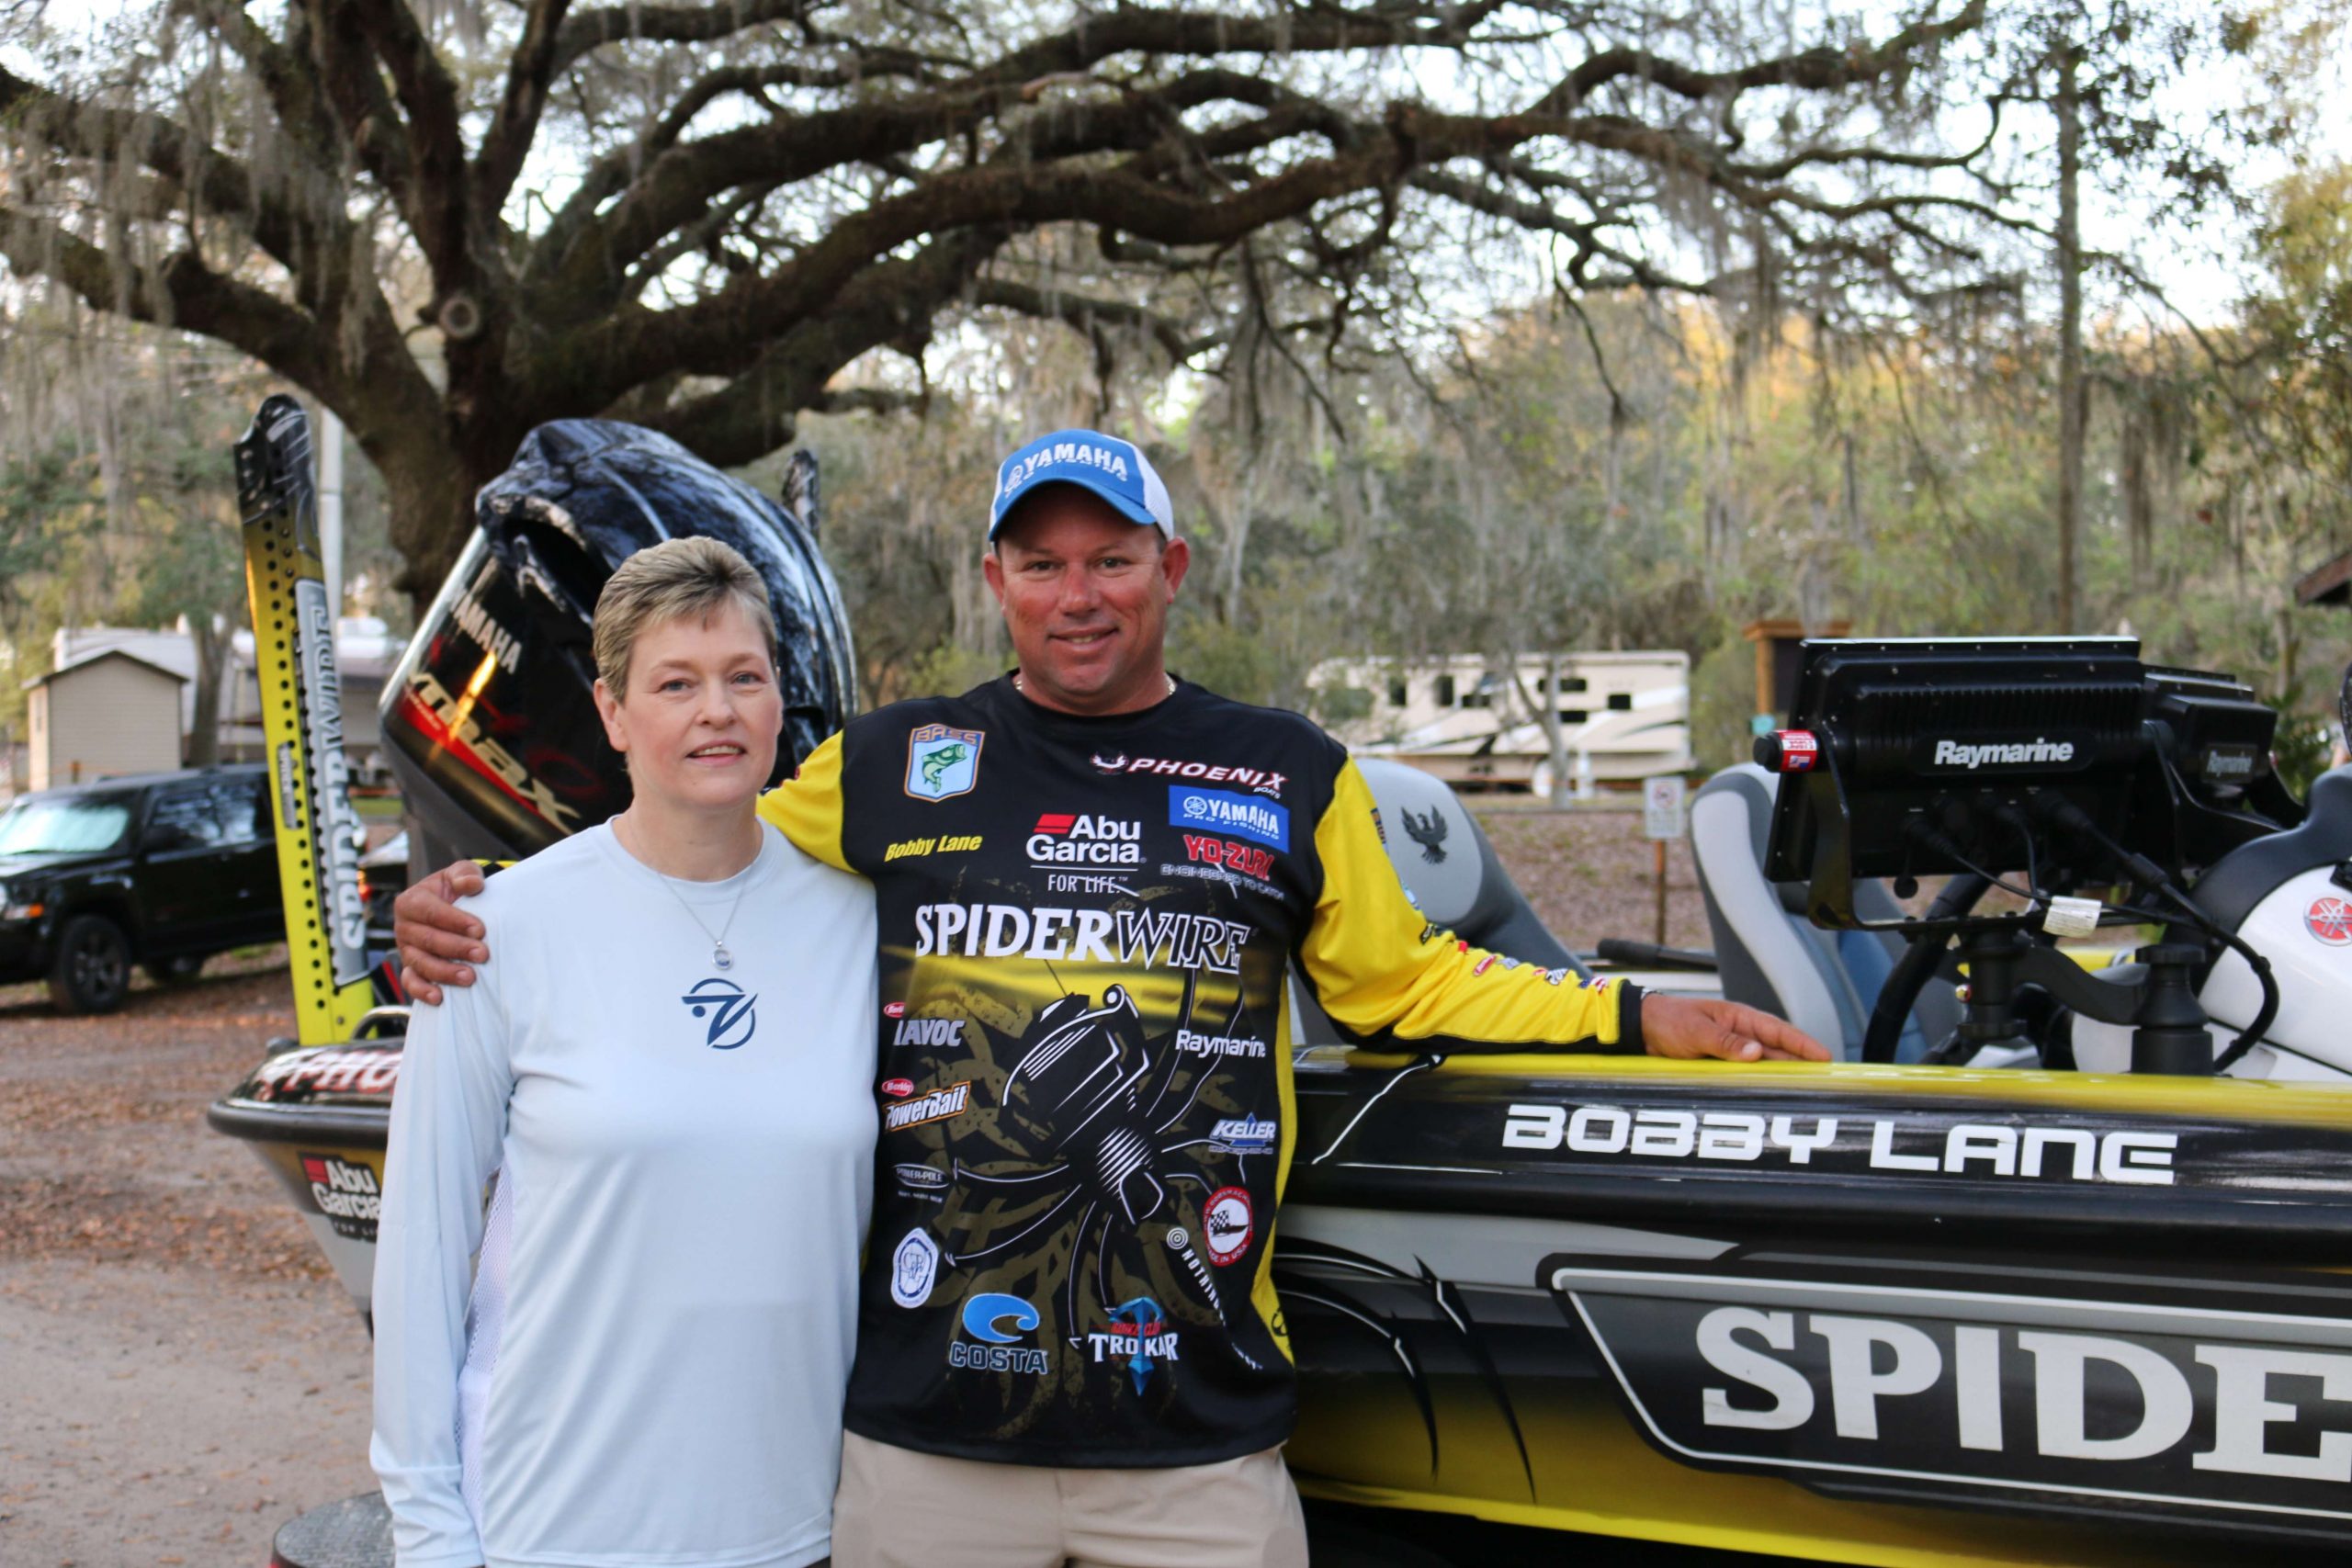 Monday morning Ronda meets Bobby at Camp Mack on the Kissimmee Chain of Lakes for a day of fishing.